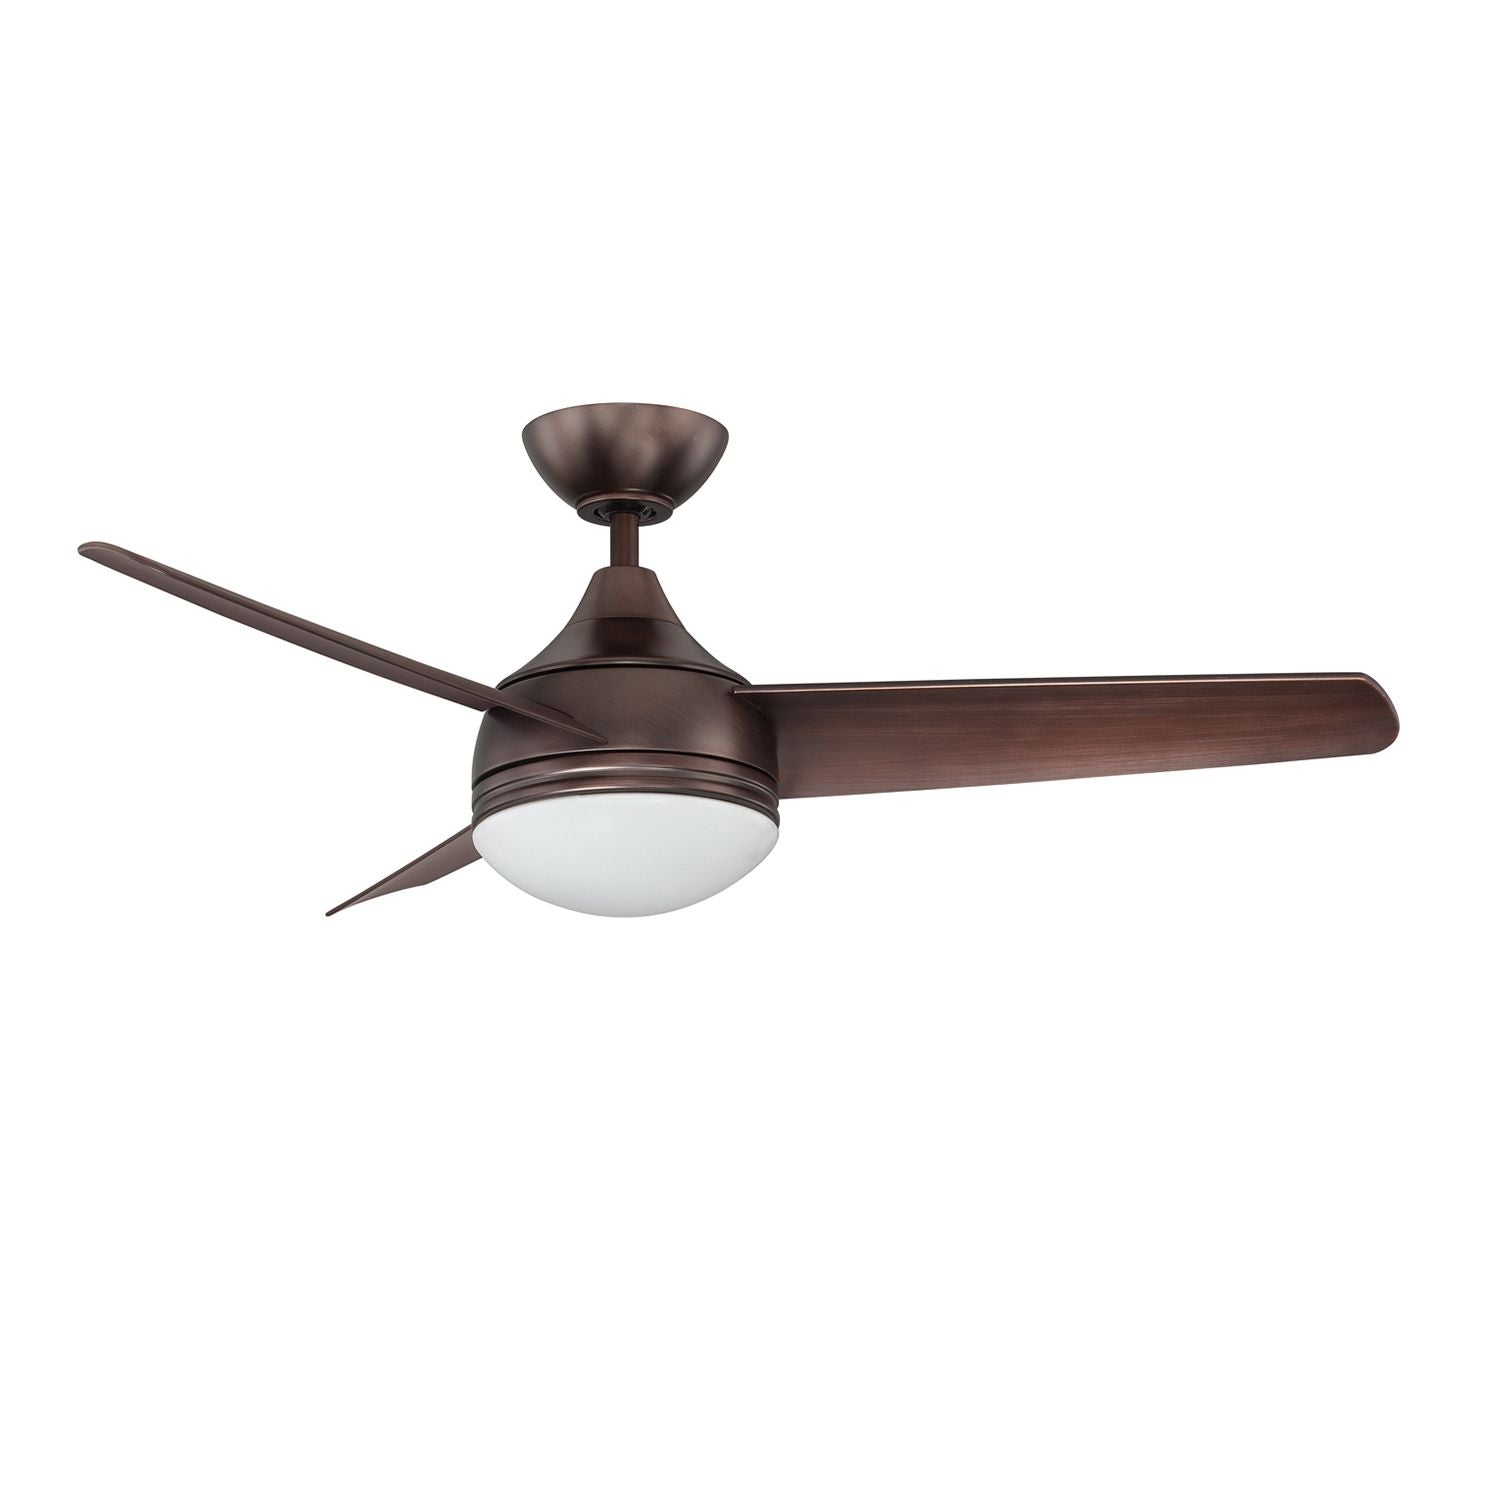 Moderno Ceiling Fan Oil Brushed Bronze with matching blades